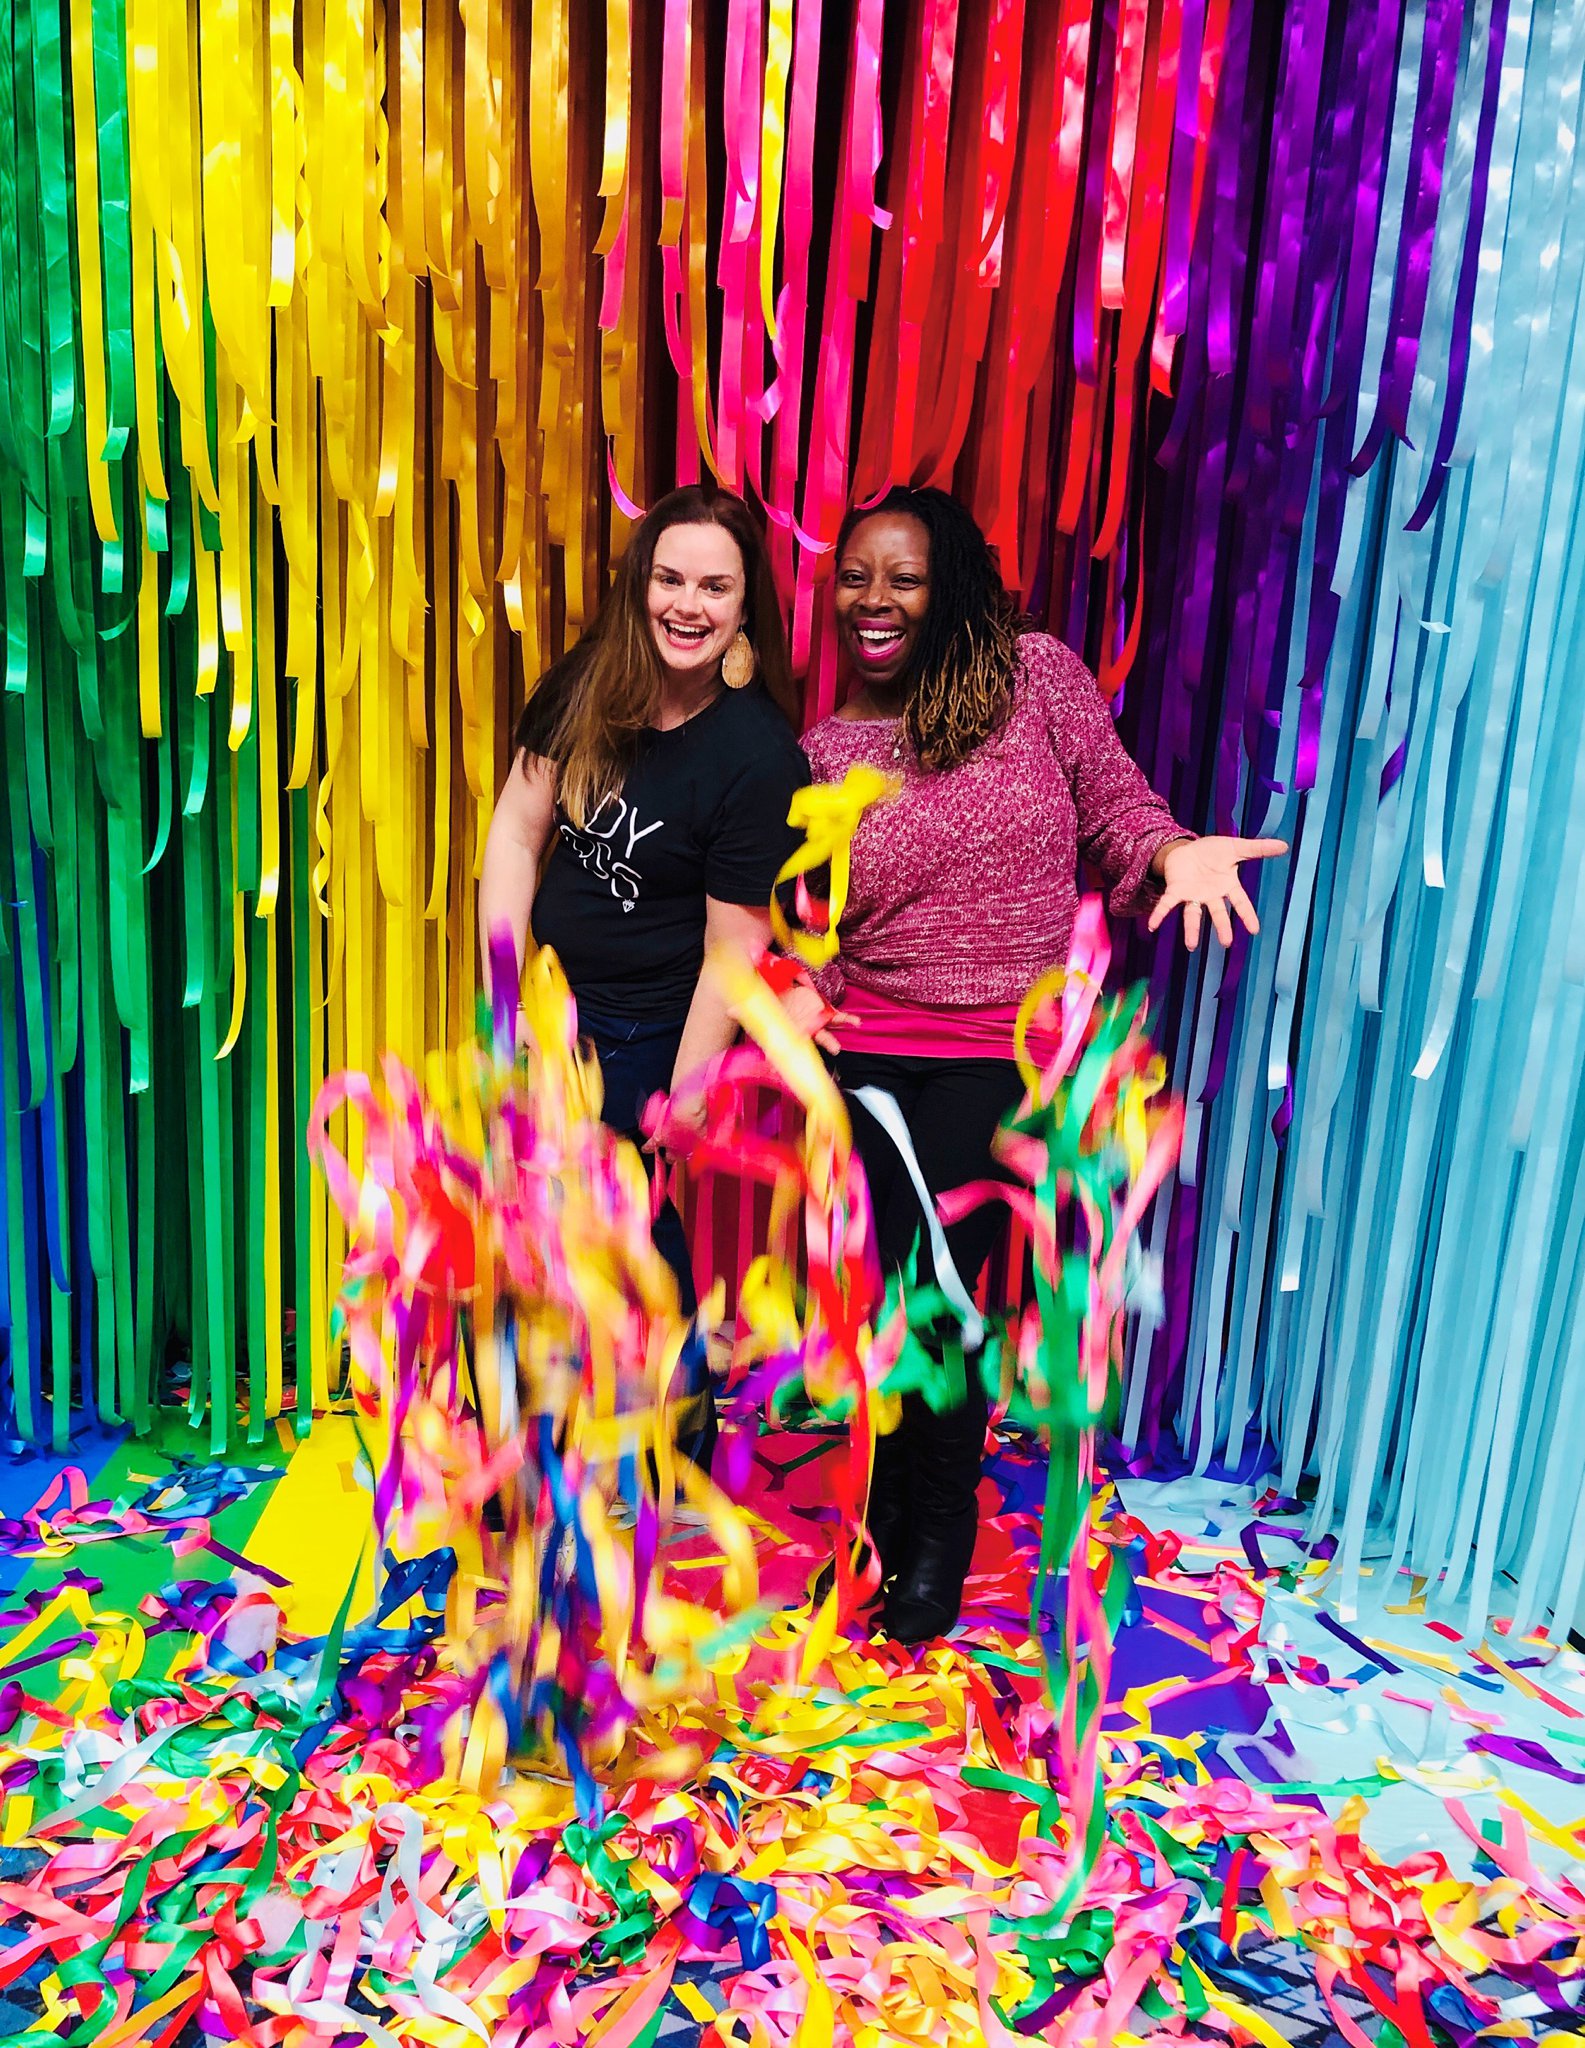 White and Black Female Photographers laughing in front of rainbow streamers at Imaging USA in Nashville Tennessee